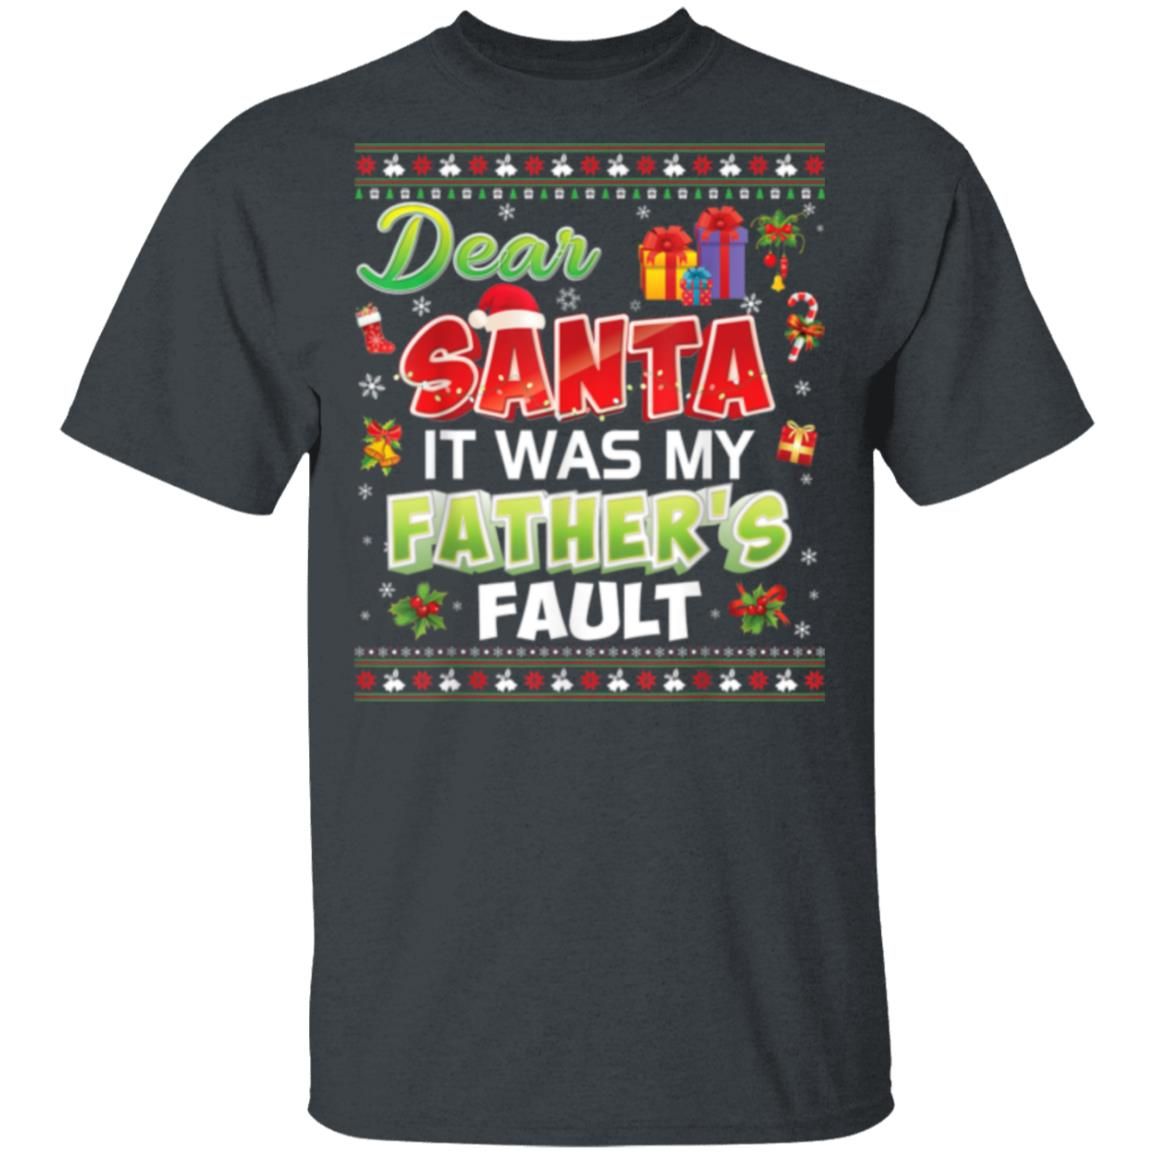 Dear Santa It Was My Father's Fault  Gift Christmas Christmas Shirt Style: Unisex T-shirt, Color: Dark Heather